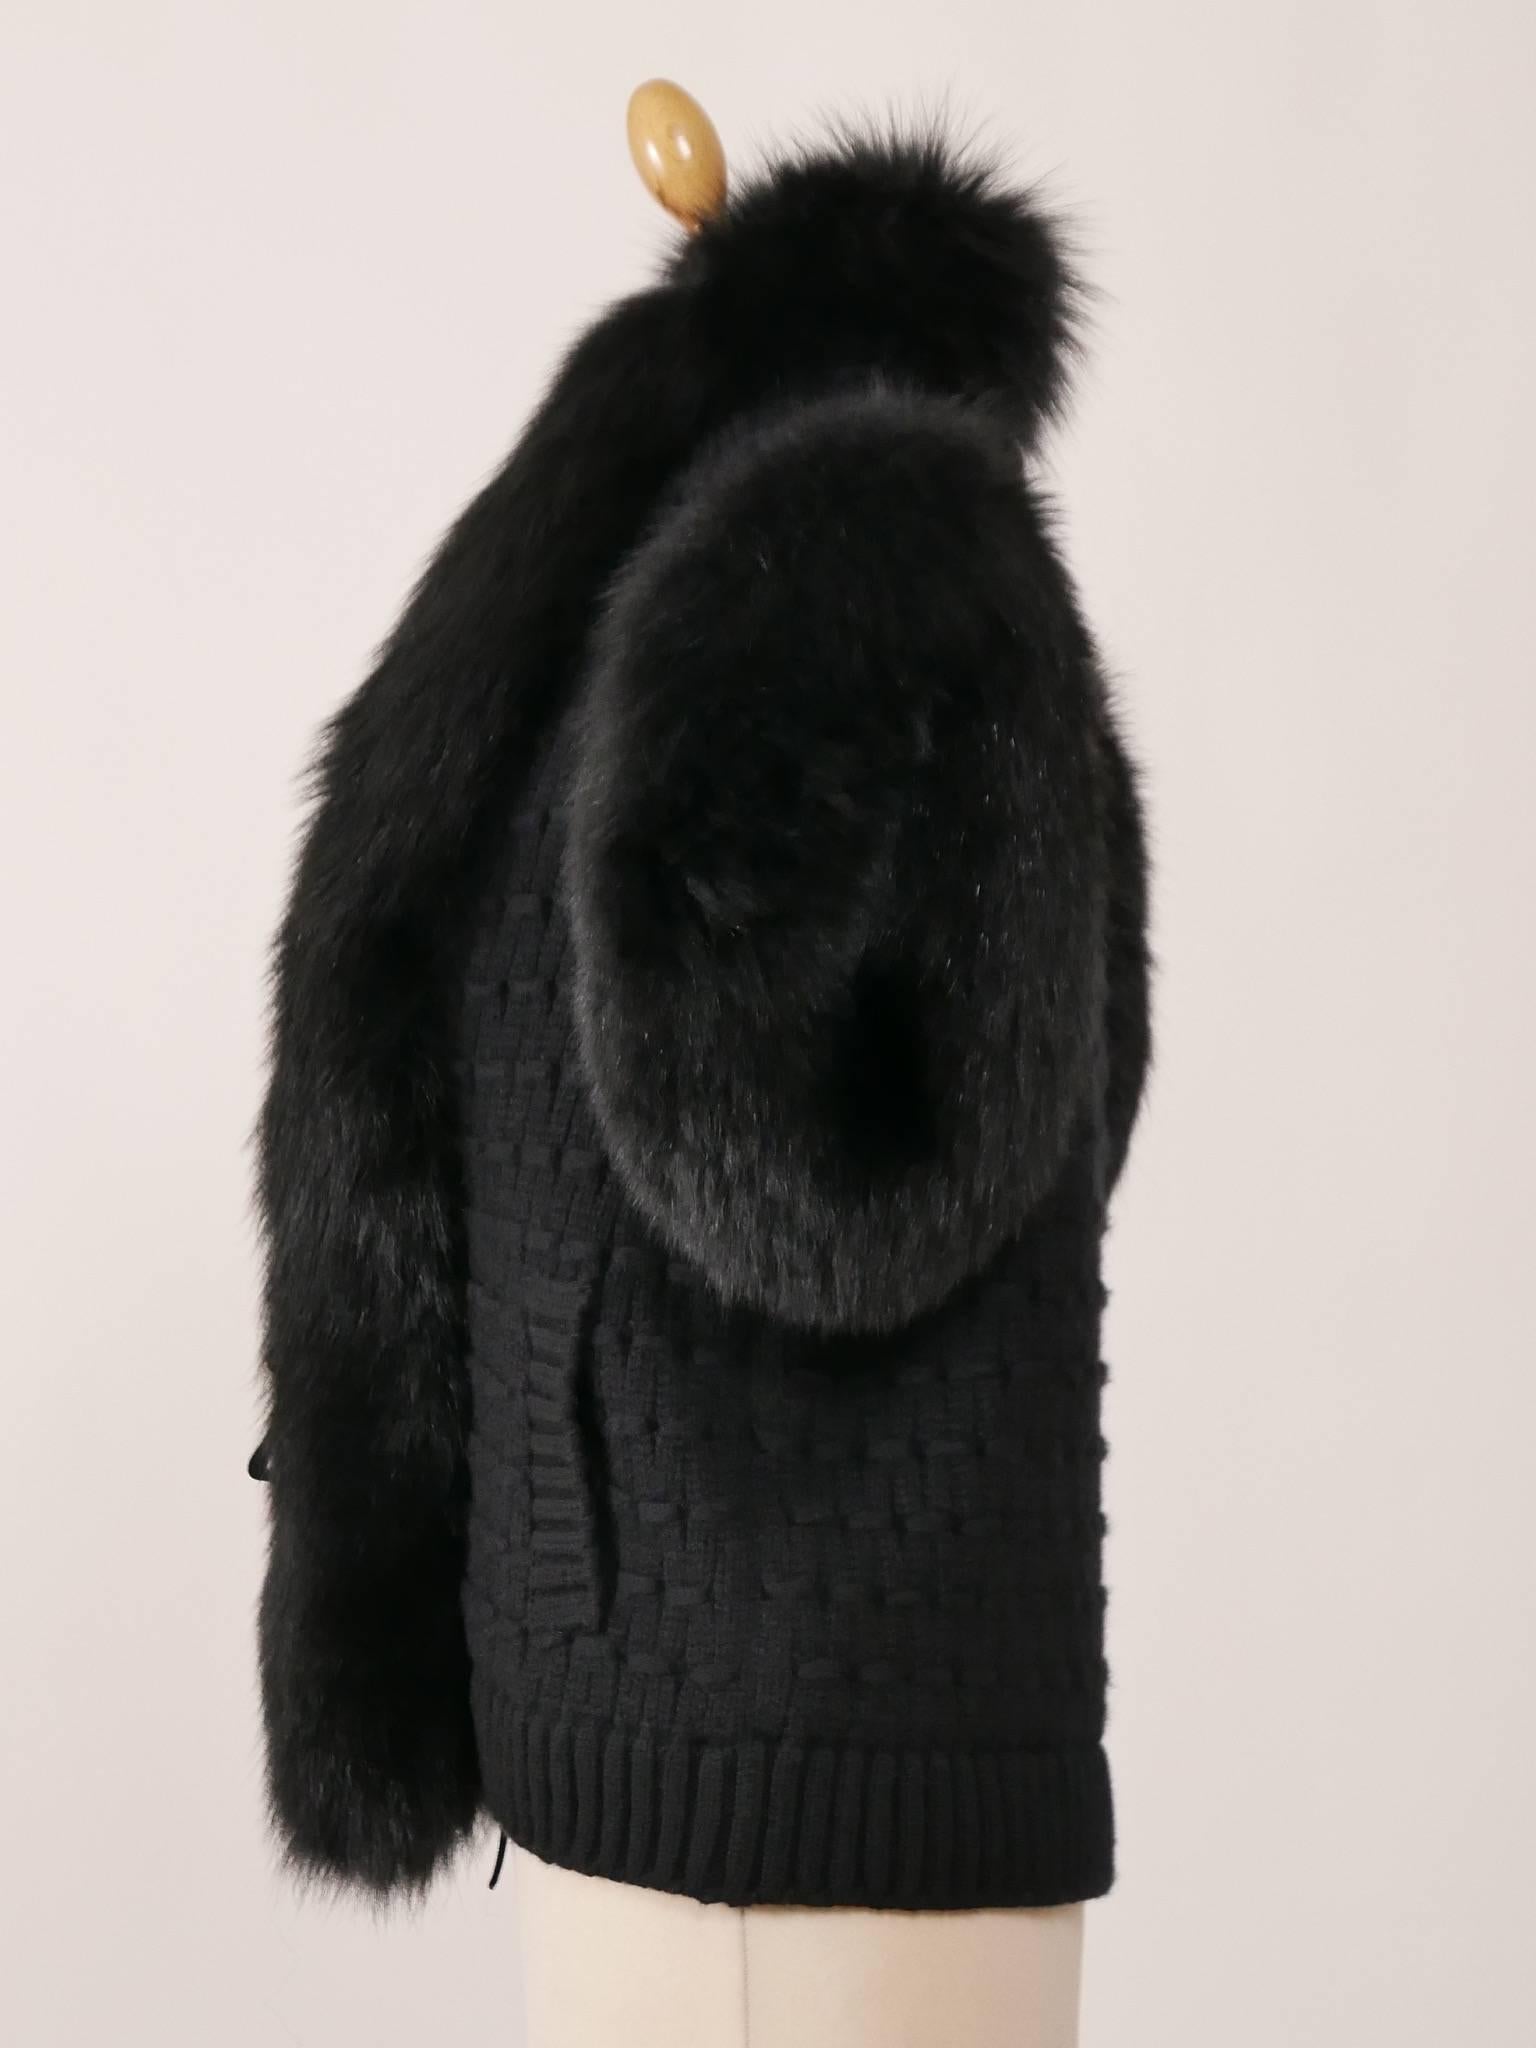 This amazing Valentino sweater jacket is in a black heavy cashmere ribbed knit with a gorgeous 100% black fox fur trim. It is closed by two velvet straps, two side pockets and is fully lined. 

Measurement:
Label size S
Estimeted size